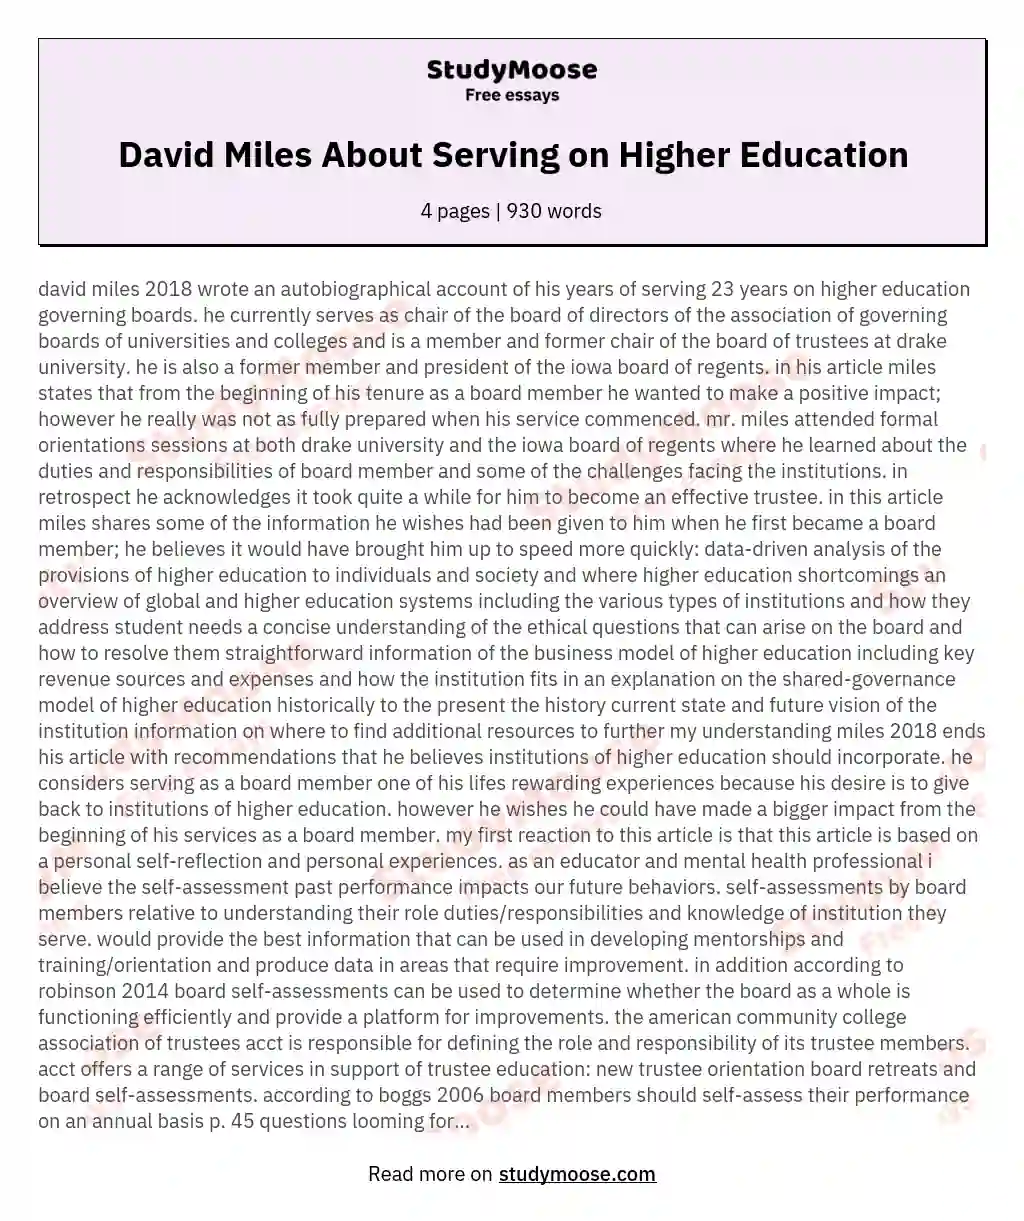 David Miles About Serving on Higher Education